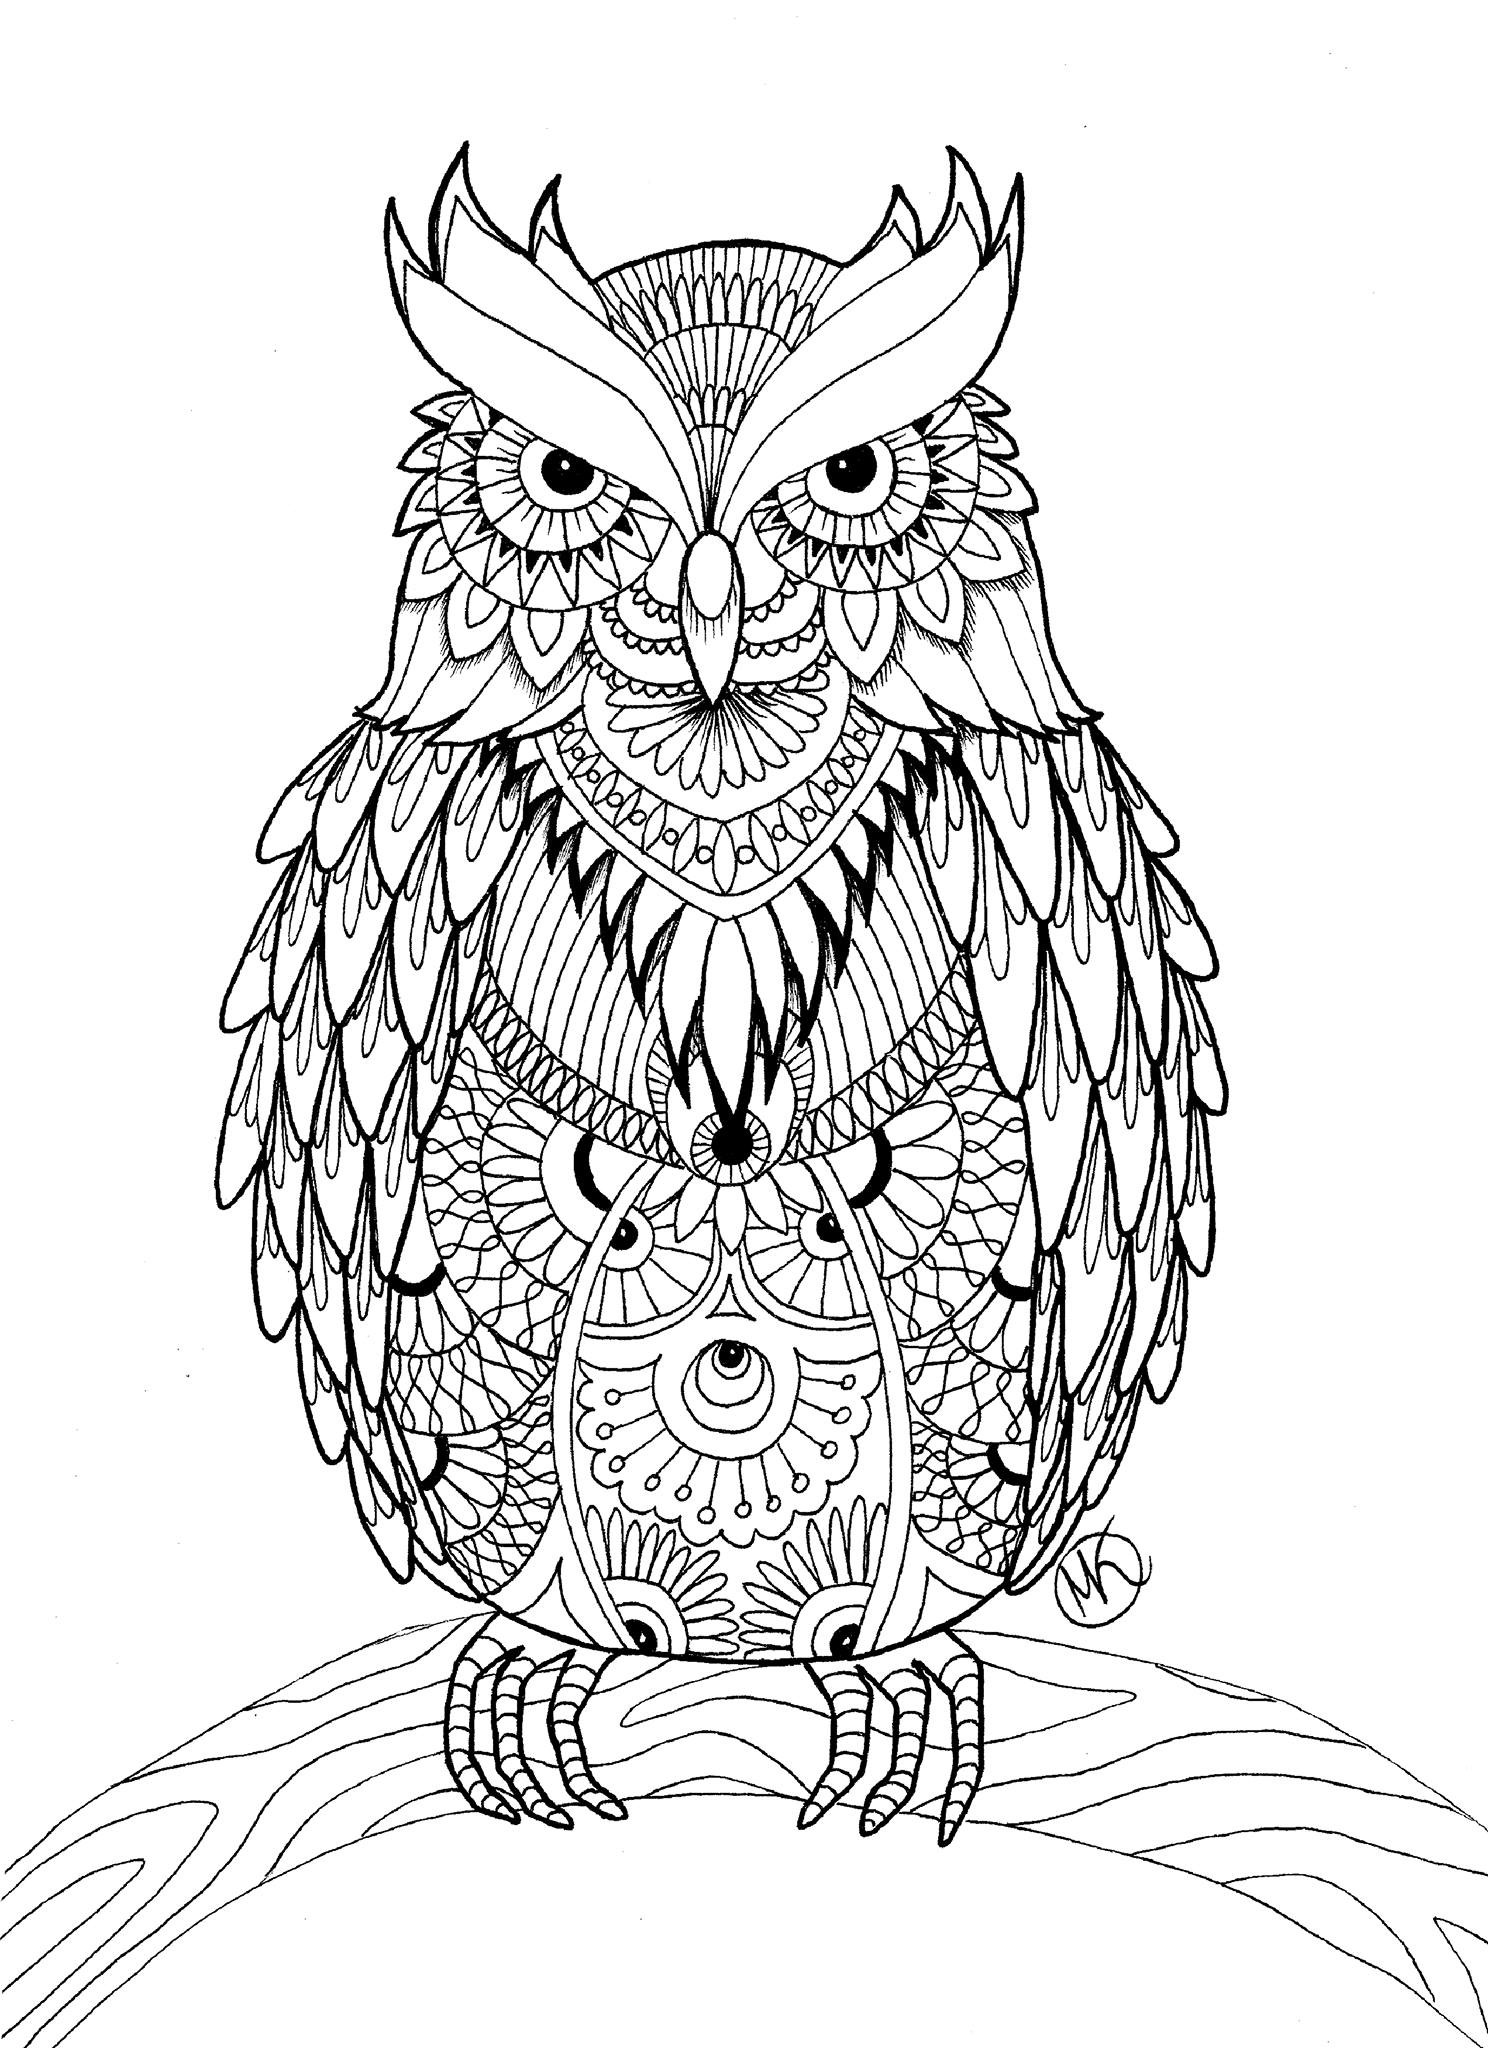 Adult Coloring Pages Free
 OWL Coloring Pages for Adults Free Detailed Owl Coloring